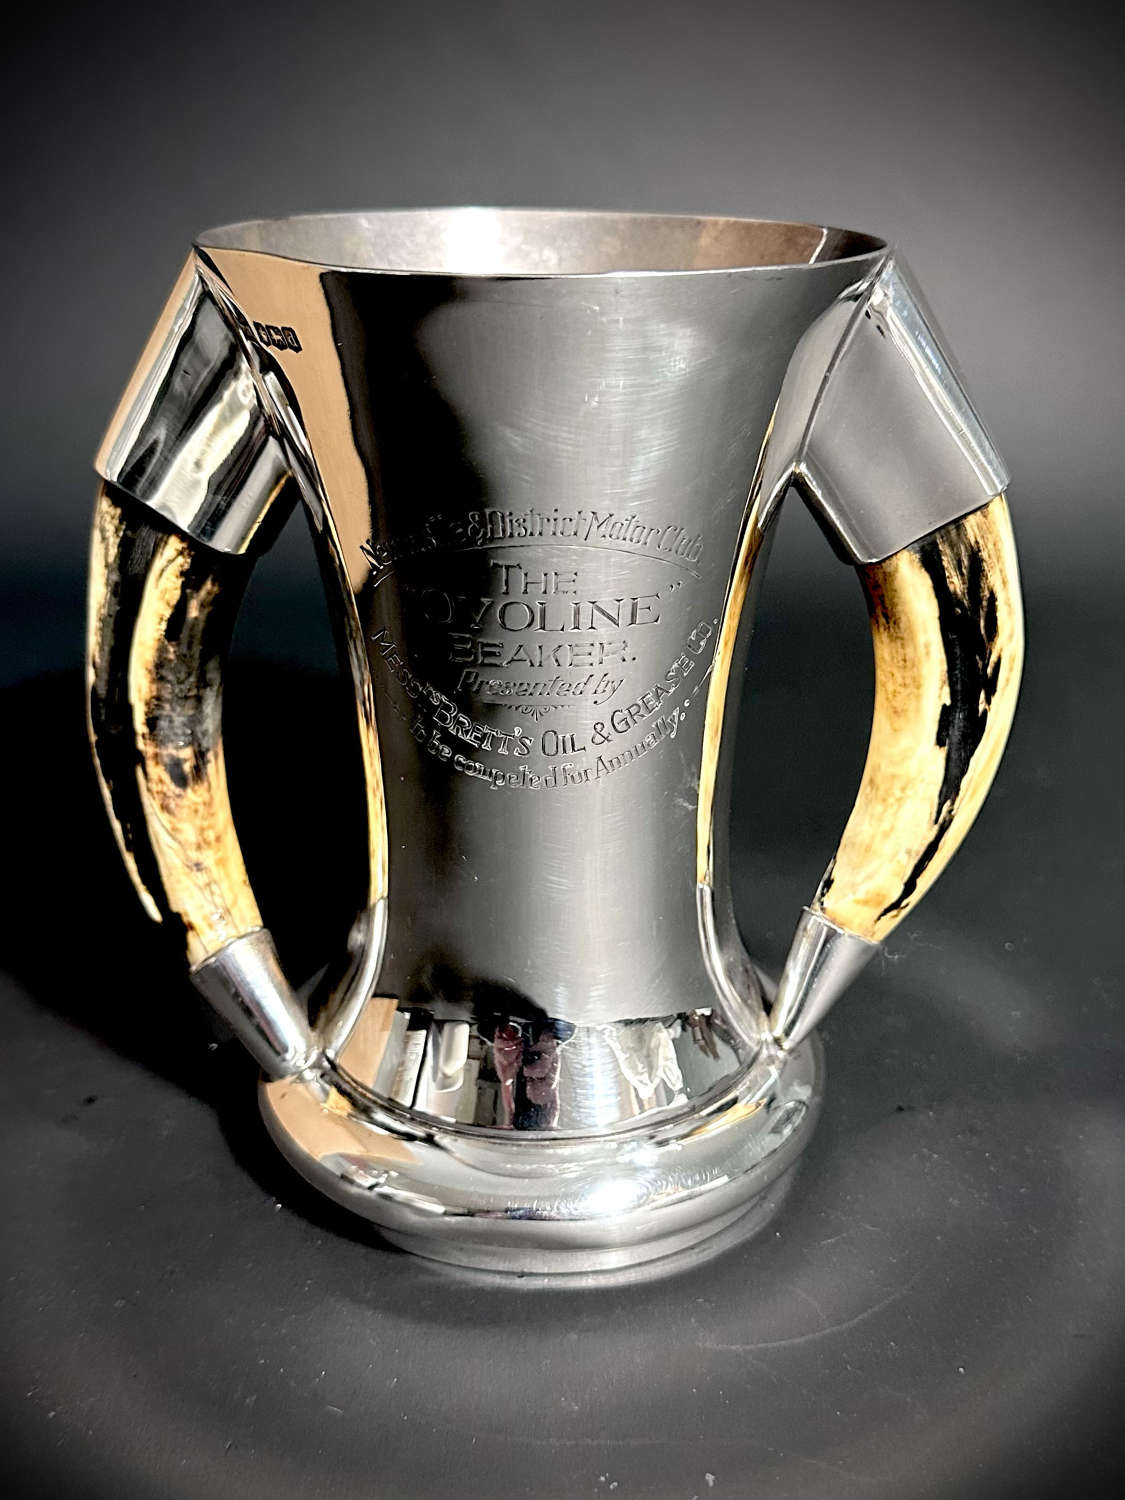 A silver and boar tusk Trophy cup tankard. The Ovaline Beaker